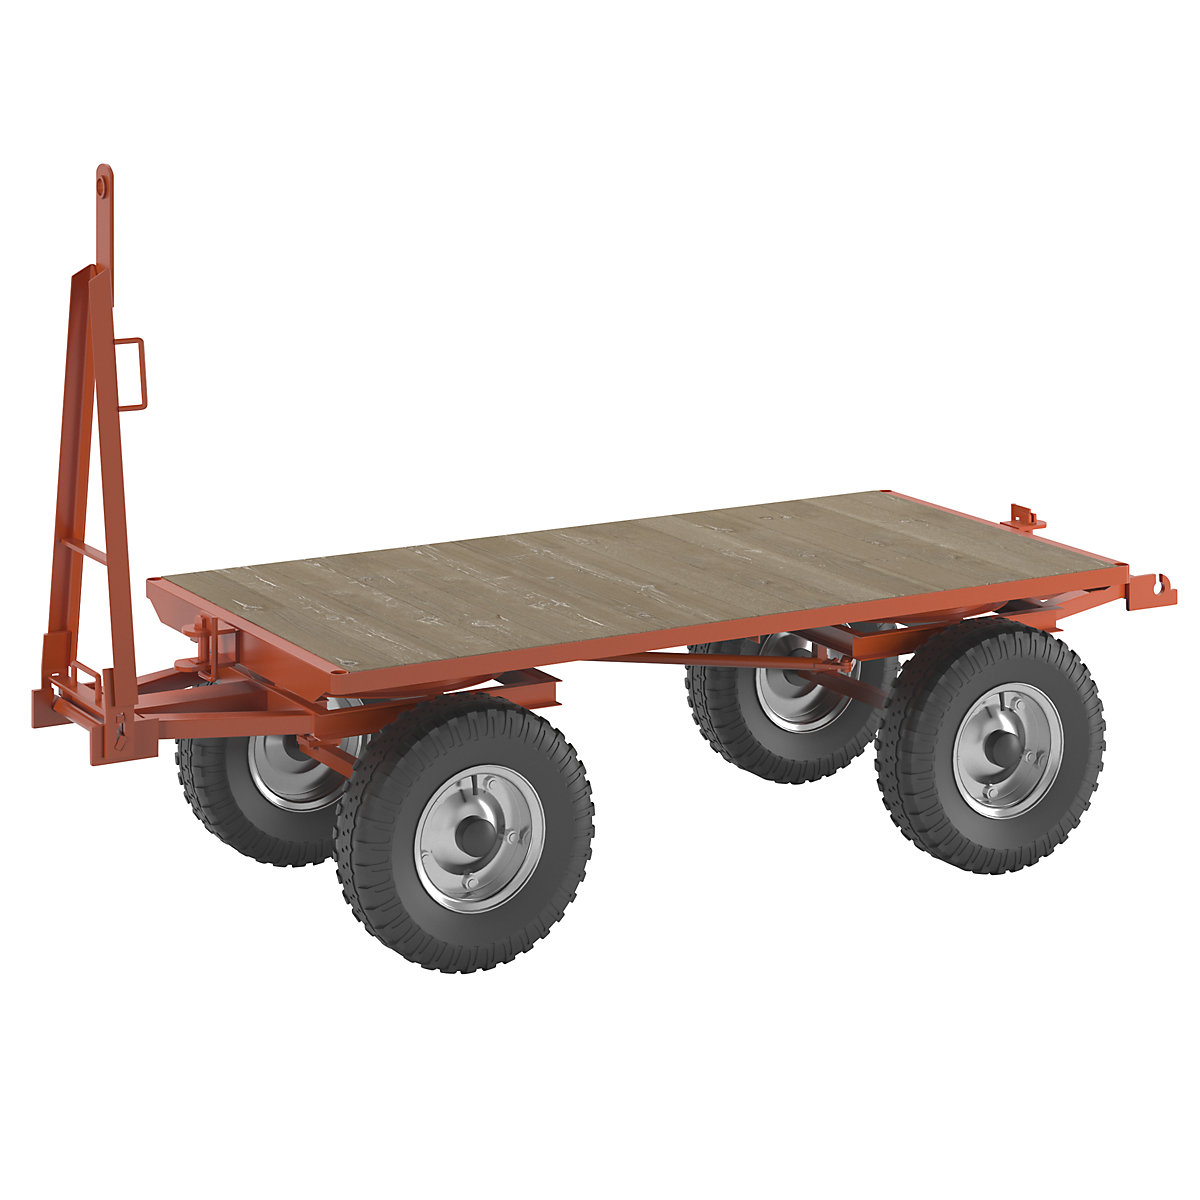 Trailer, 4-wheel double turntable steering, max. load 5 t, platform 2.0 x 1.0 m, pneumatic tyres-13